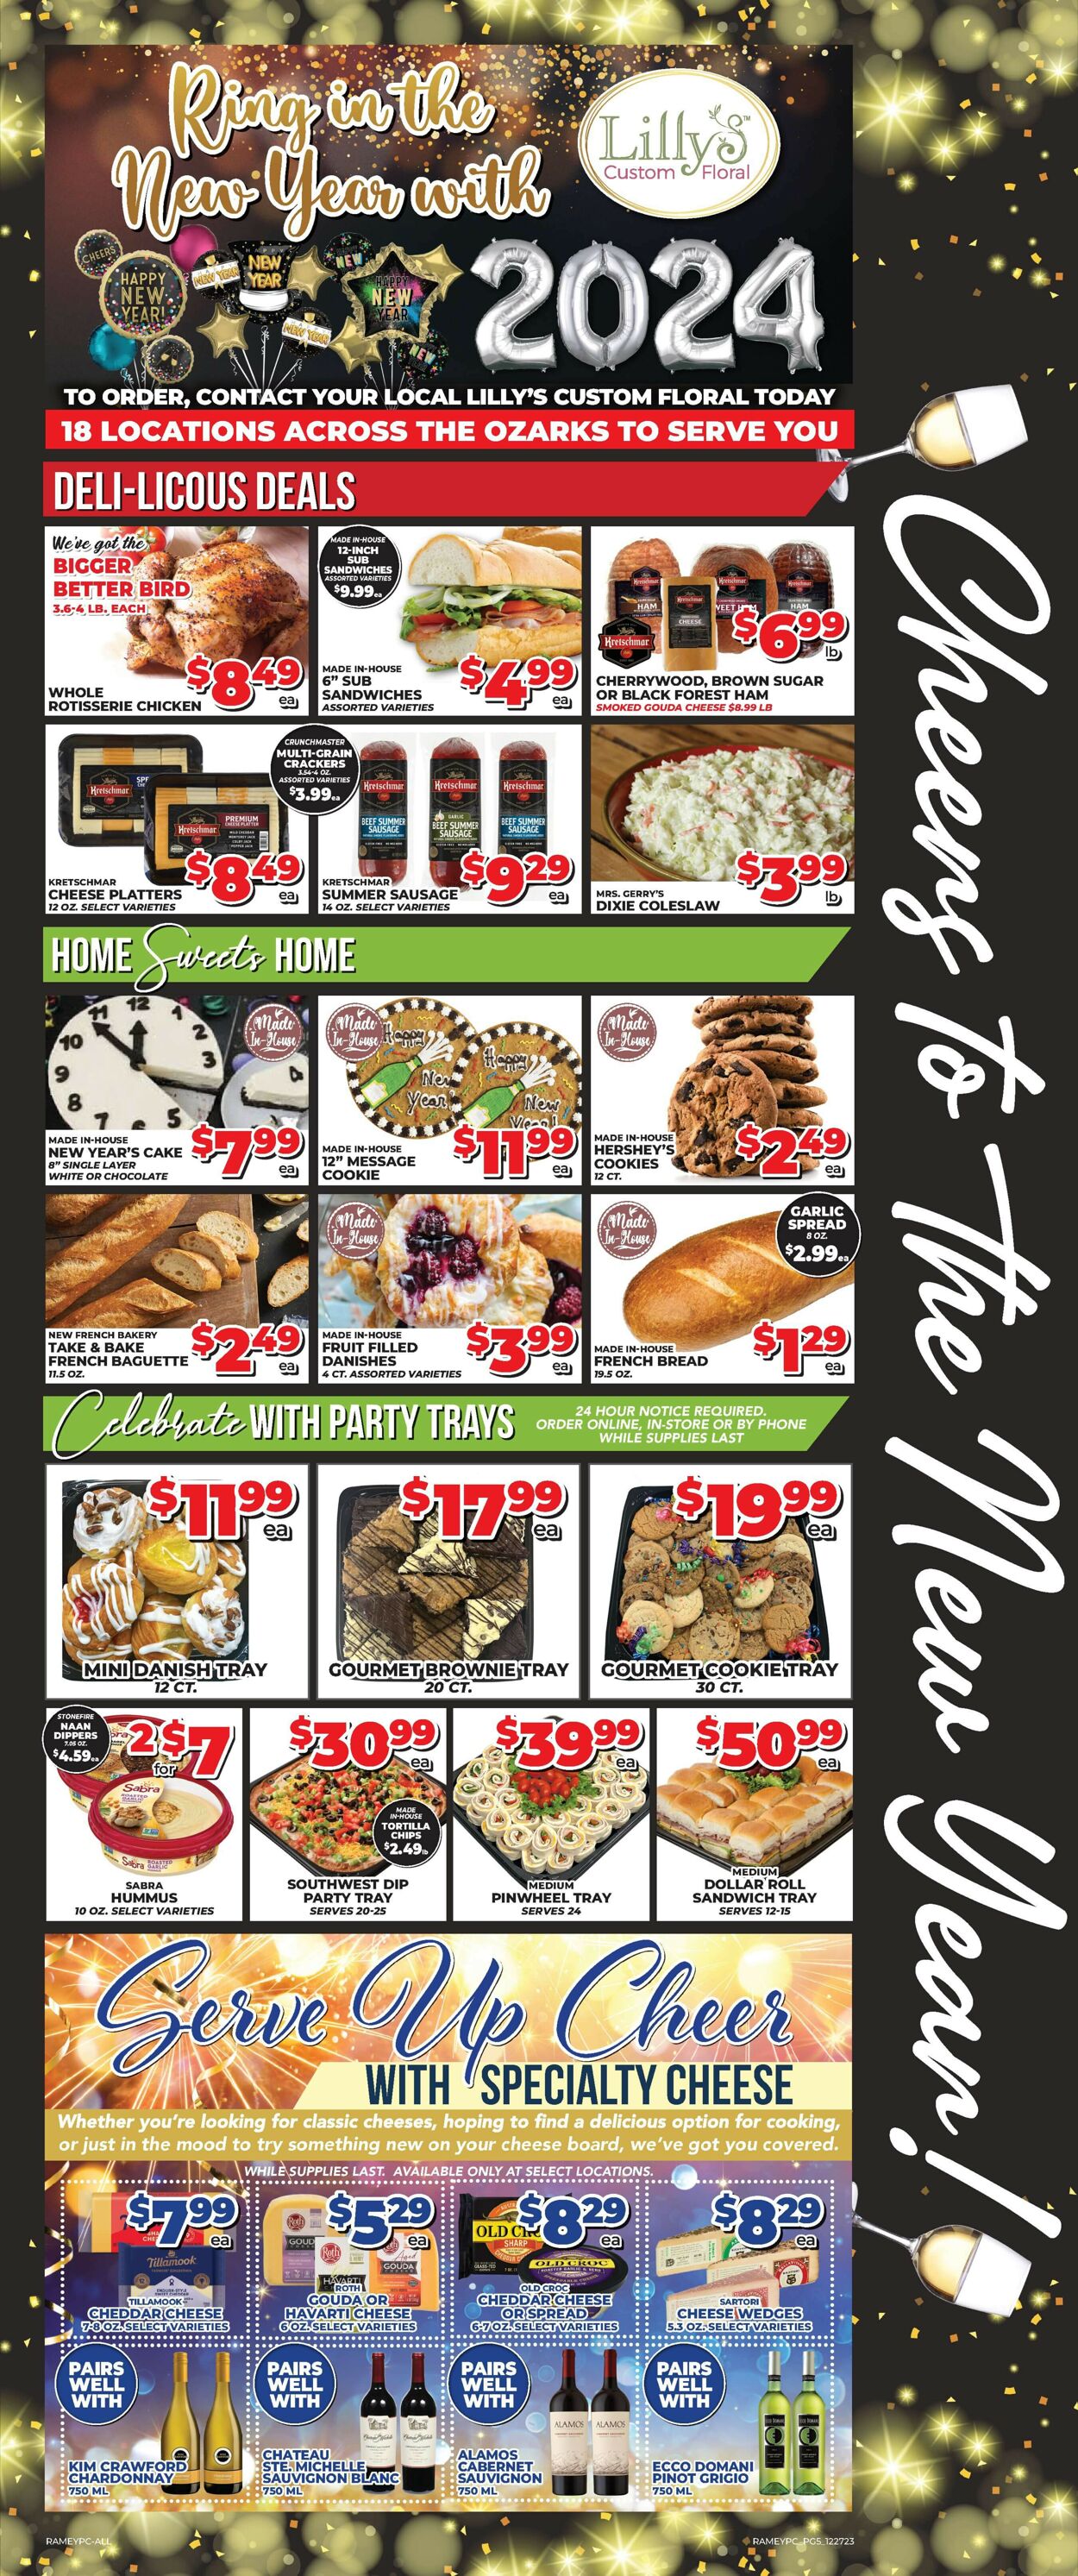 Price Cutter Weekly Ad Circular - valid 12/27-01/02/2024 (Page 5)